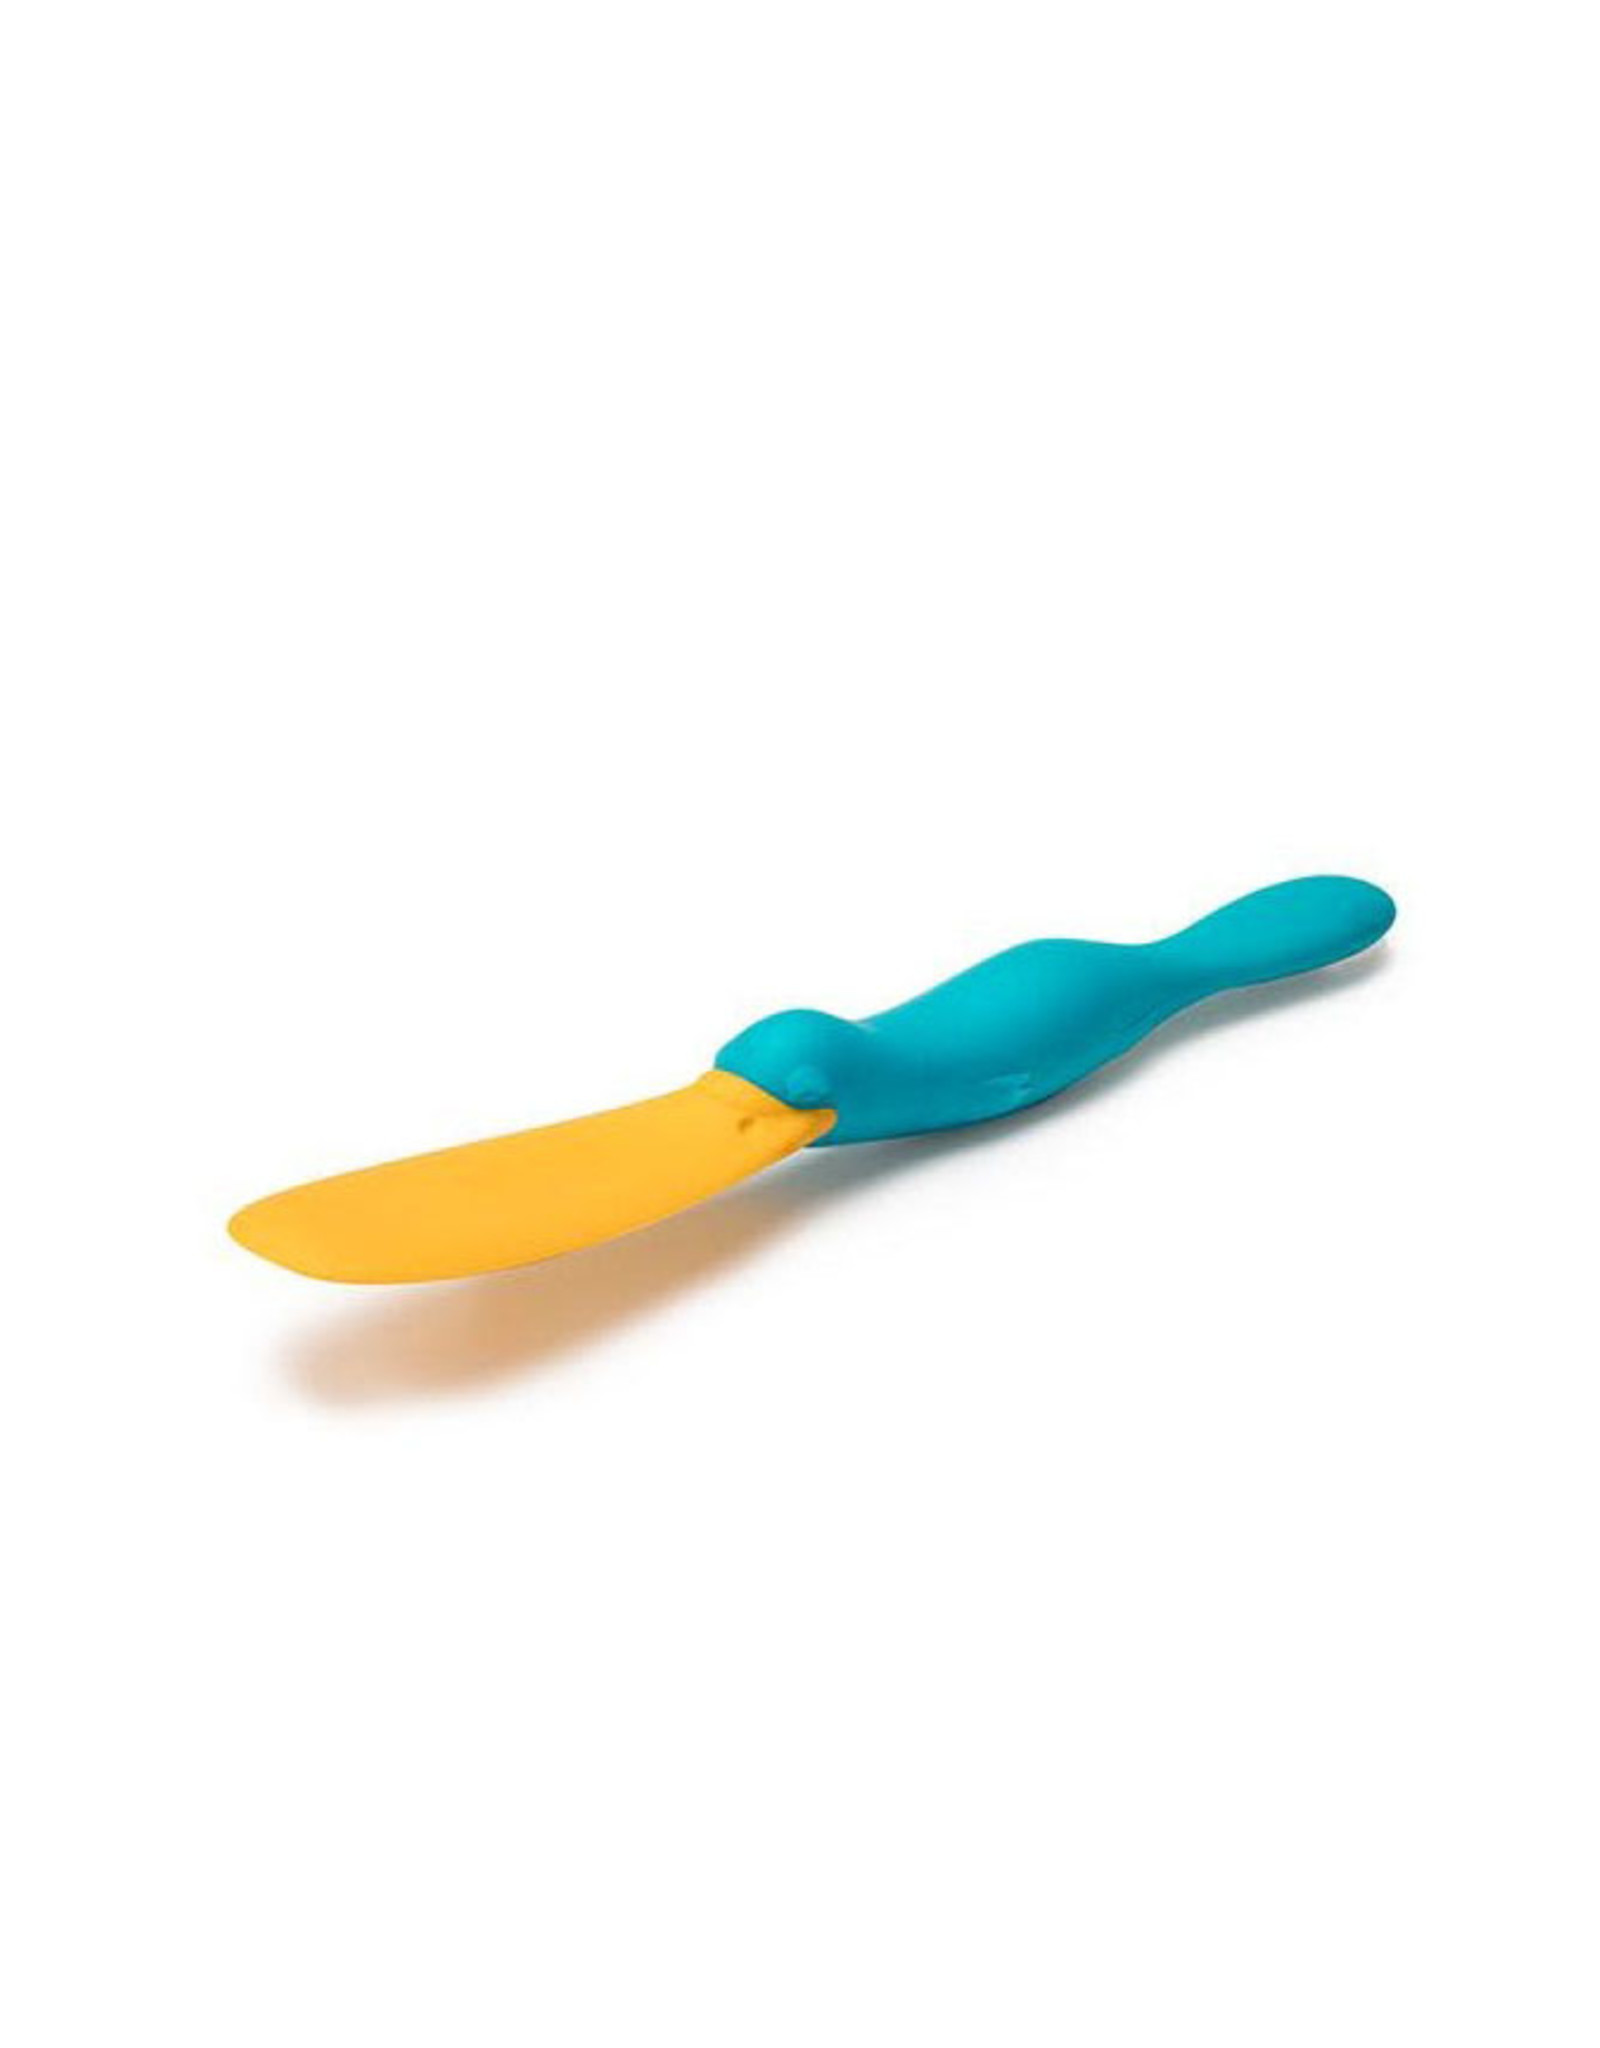 OTOTO Splatypus Jar Spatula for Scooping and Scraping - Unique Fun Cooking  Kitchen Gadgets for Foodi…See more OTOTO Splatypus Jar Spatula for Scooping